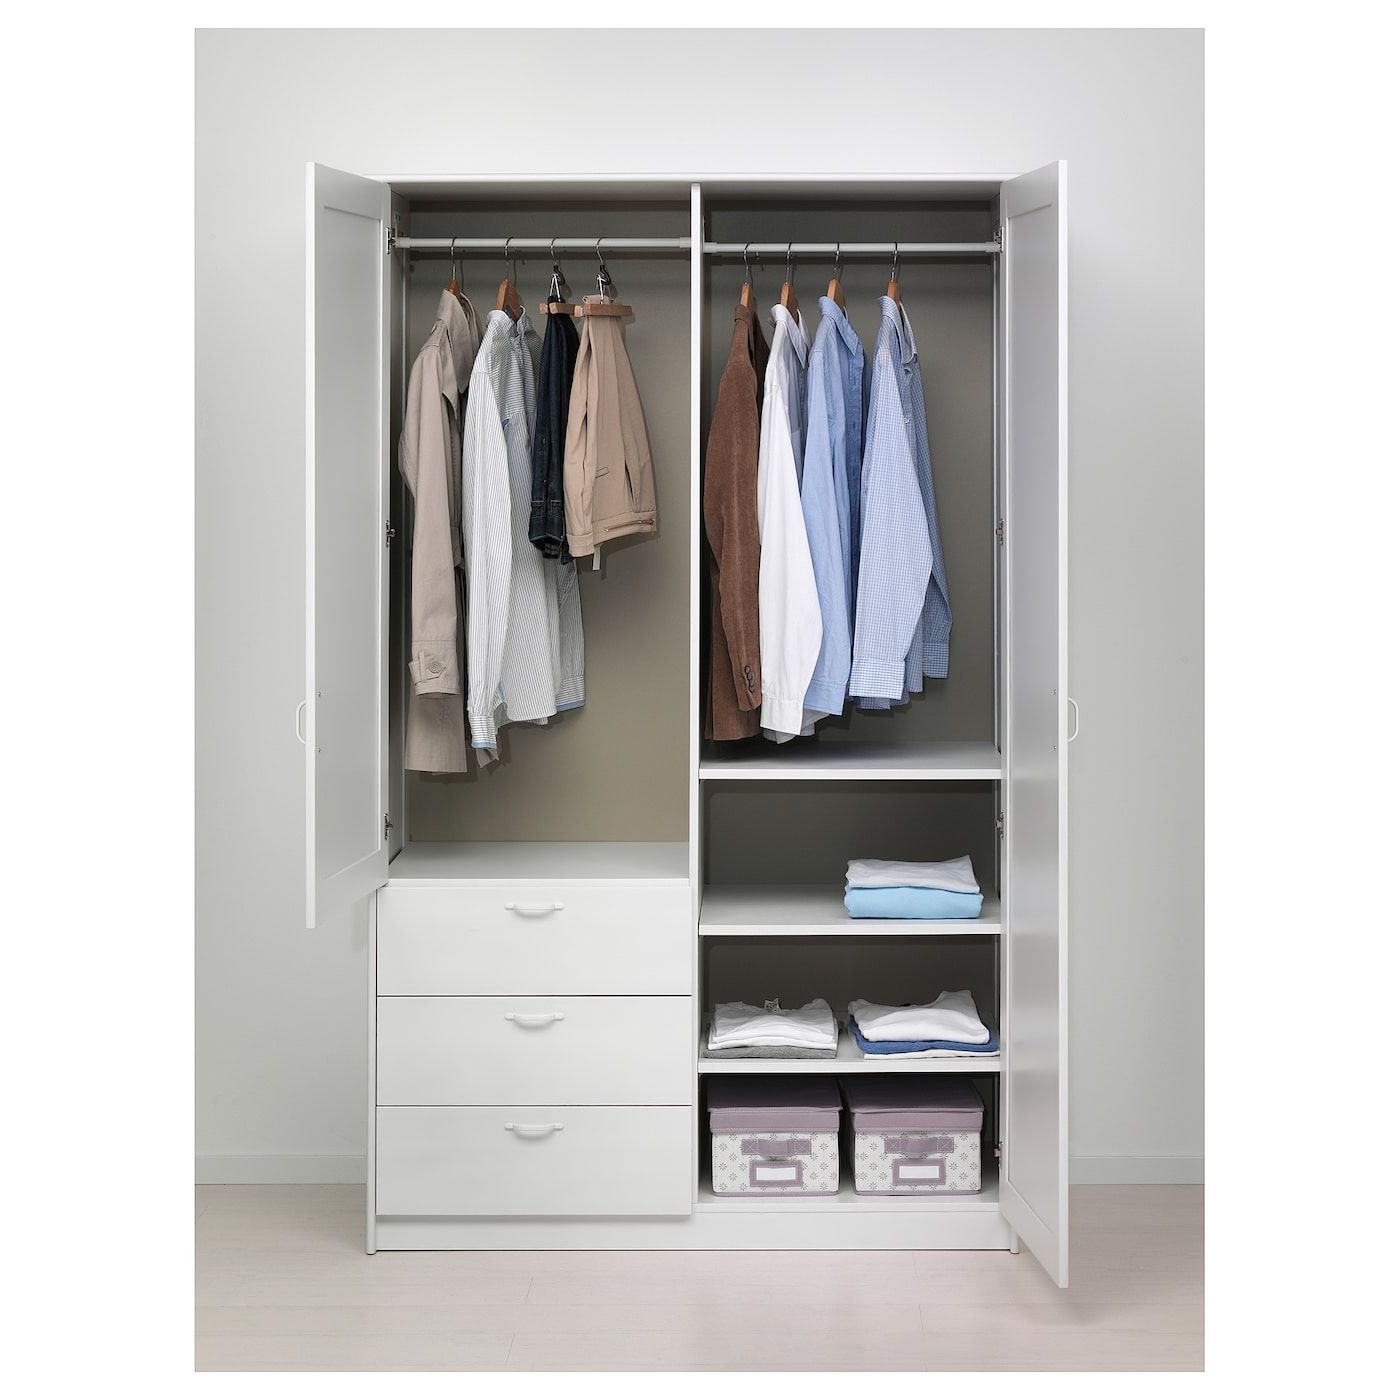 Latest Musken Wardrobe With 2 Doors+3 Drawers, White, 124x60x201 Cm – Ikea In Wardrobes With 3 Drawers (View 7 of 10)